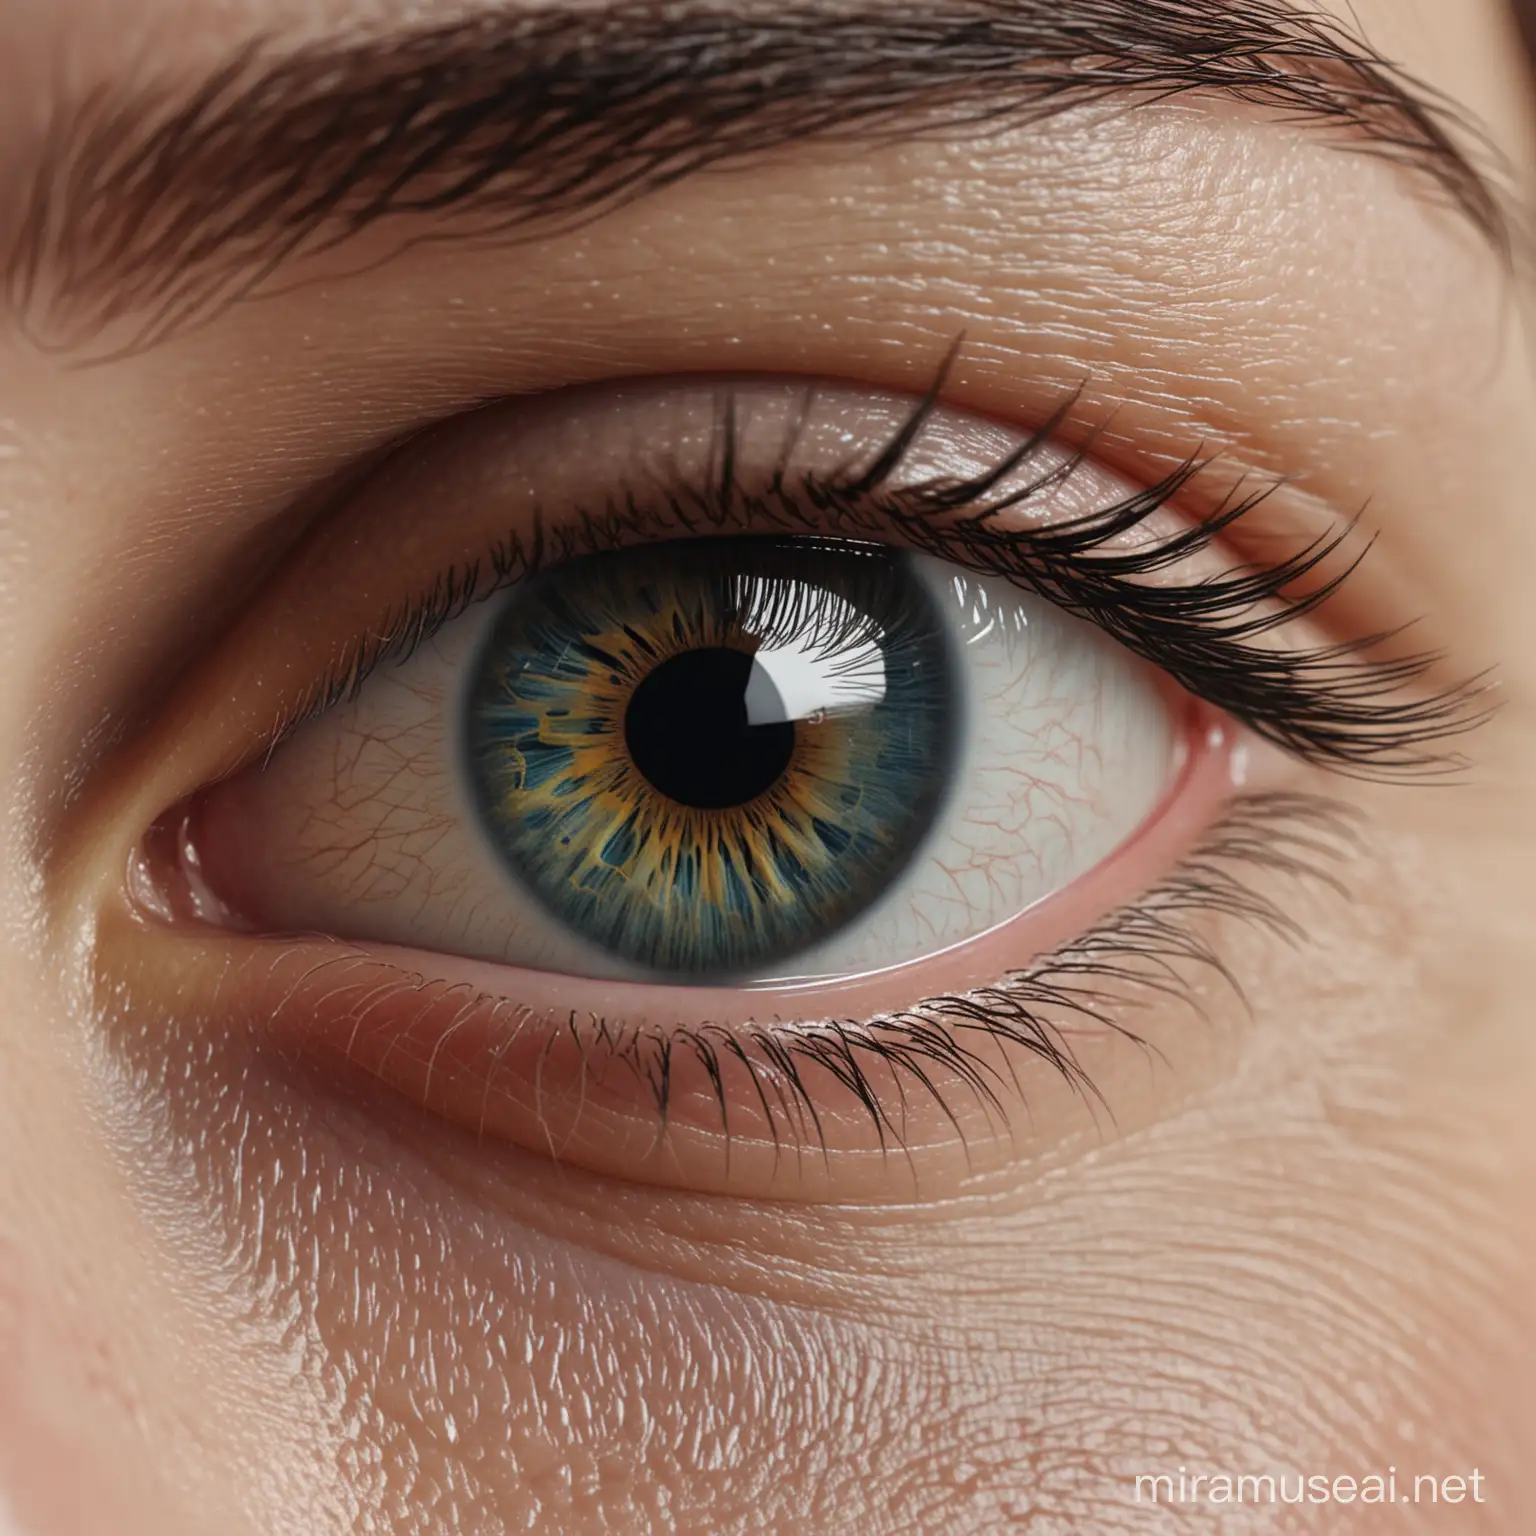 Intense Eye Contact Hyper Realistic CloseUp Portrait with Multitude Reflection